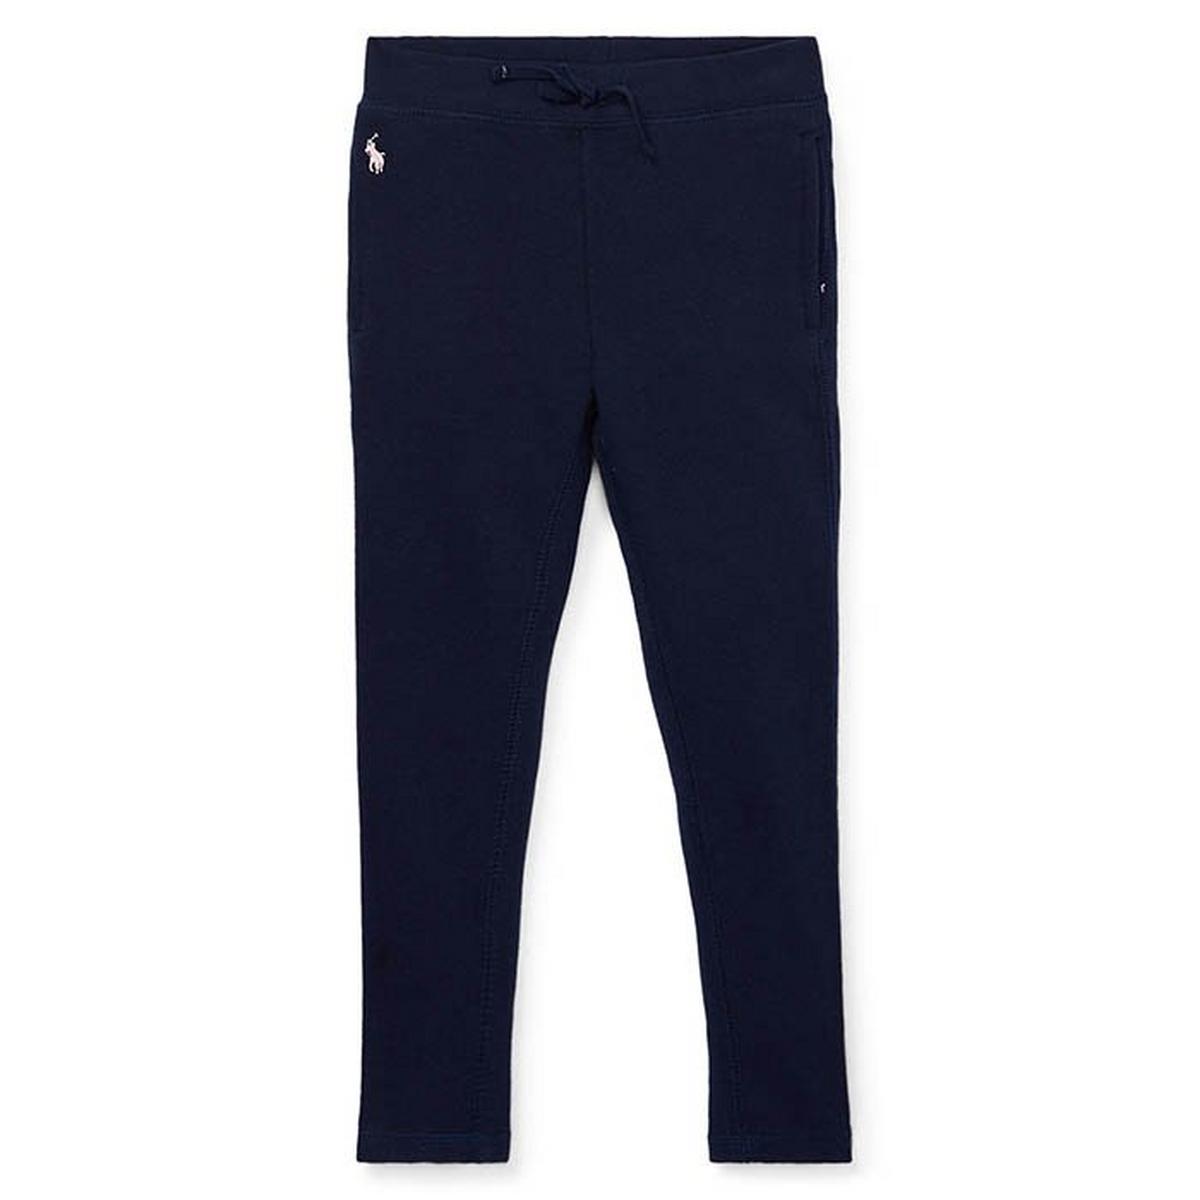 Girls' [5-6X] French Terry Jogger Pant